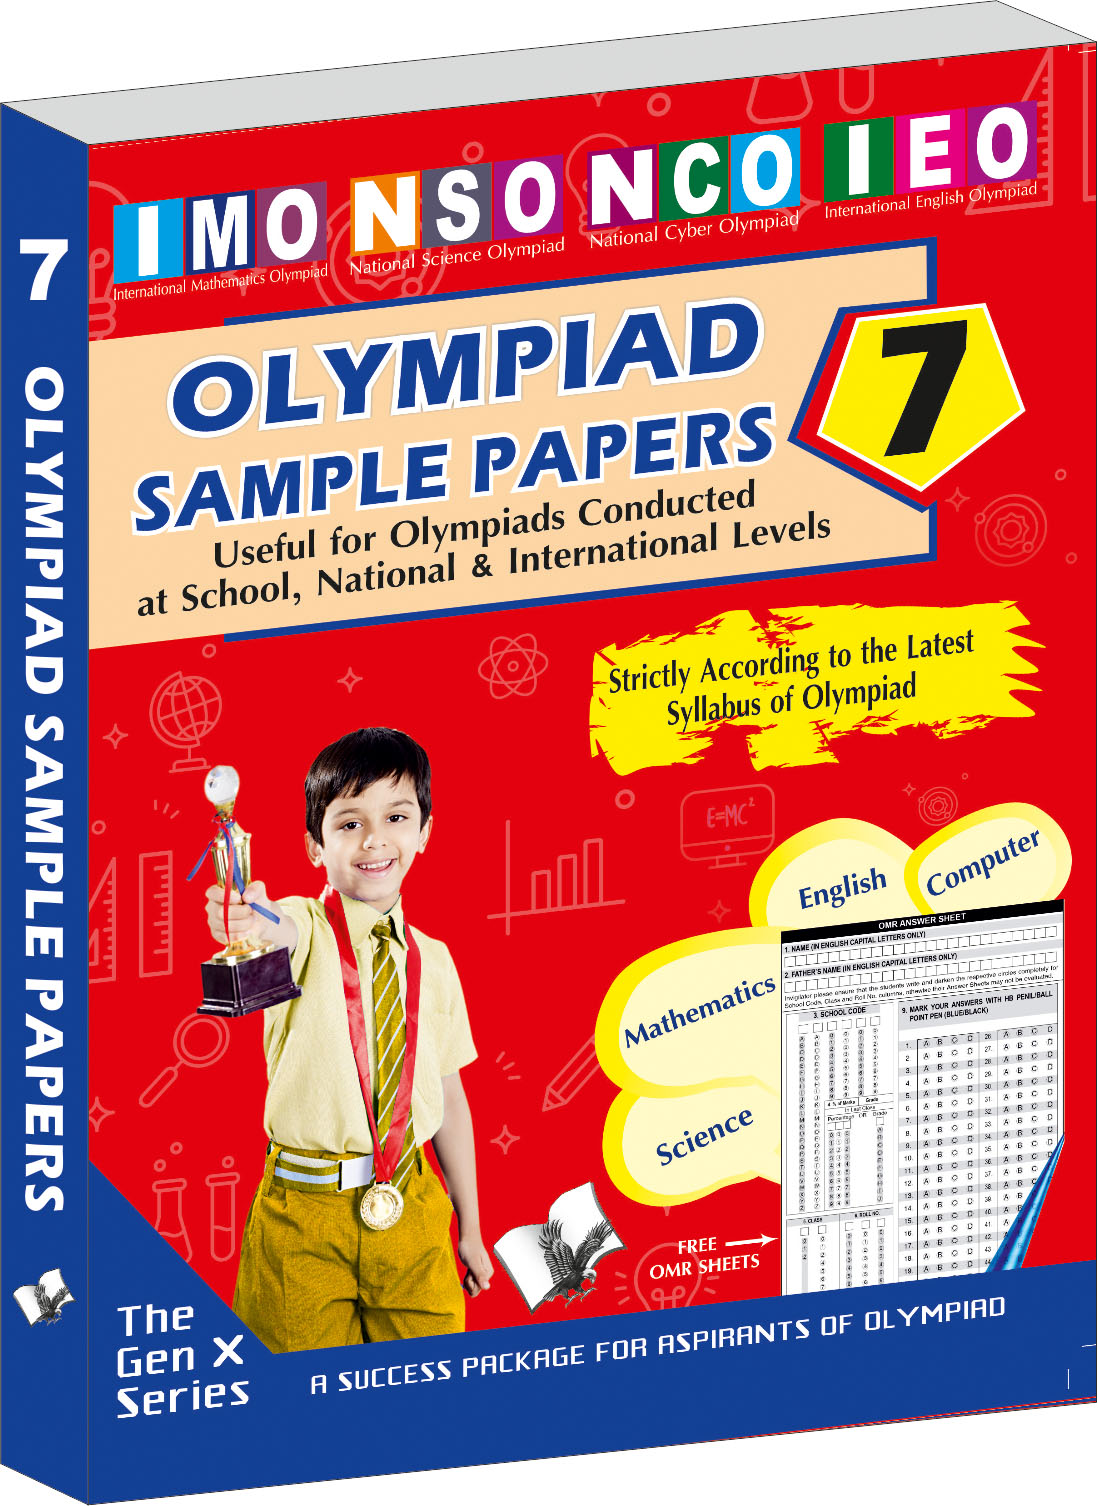 olympiad-sample-paper-7-useful-for-olympiad-conducted-at-school-national-international-levels